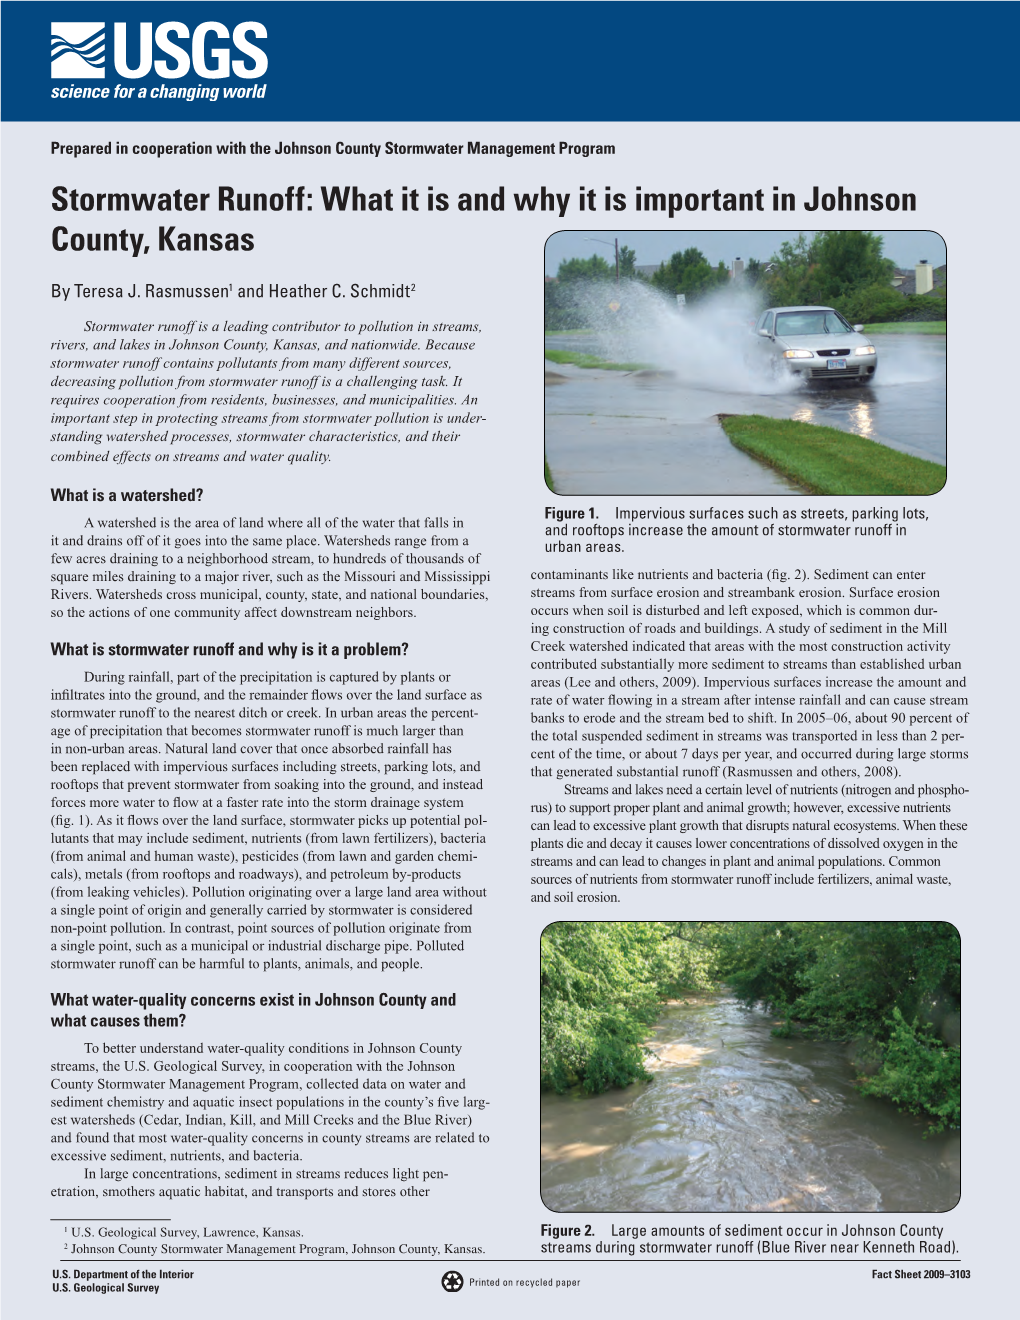 Stormwater Runoff: What It Is and Why It Is Important in Johnson County, Kansas